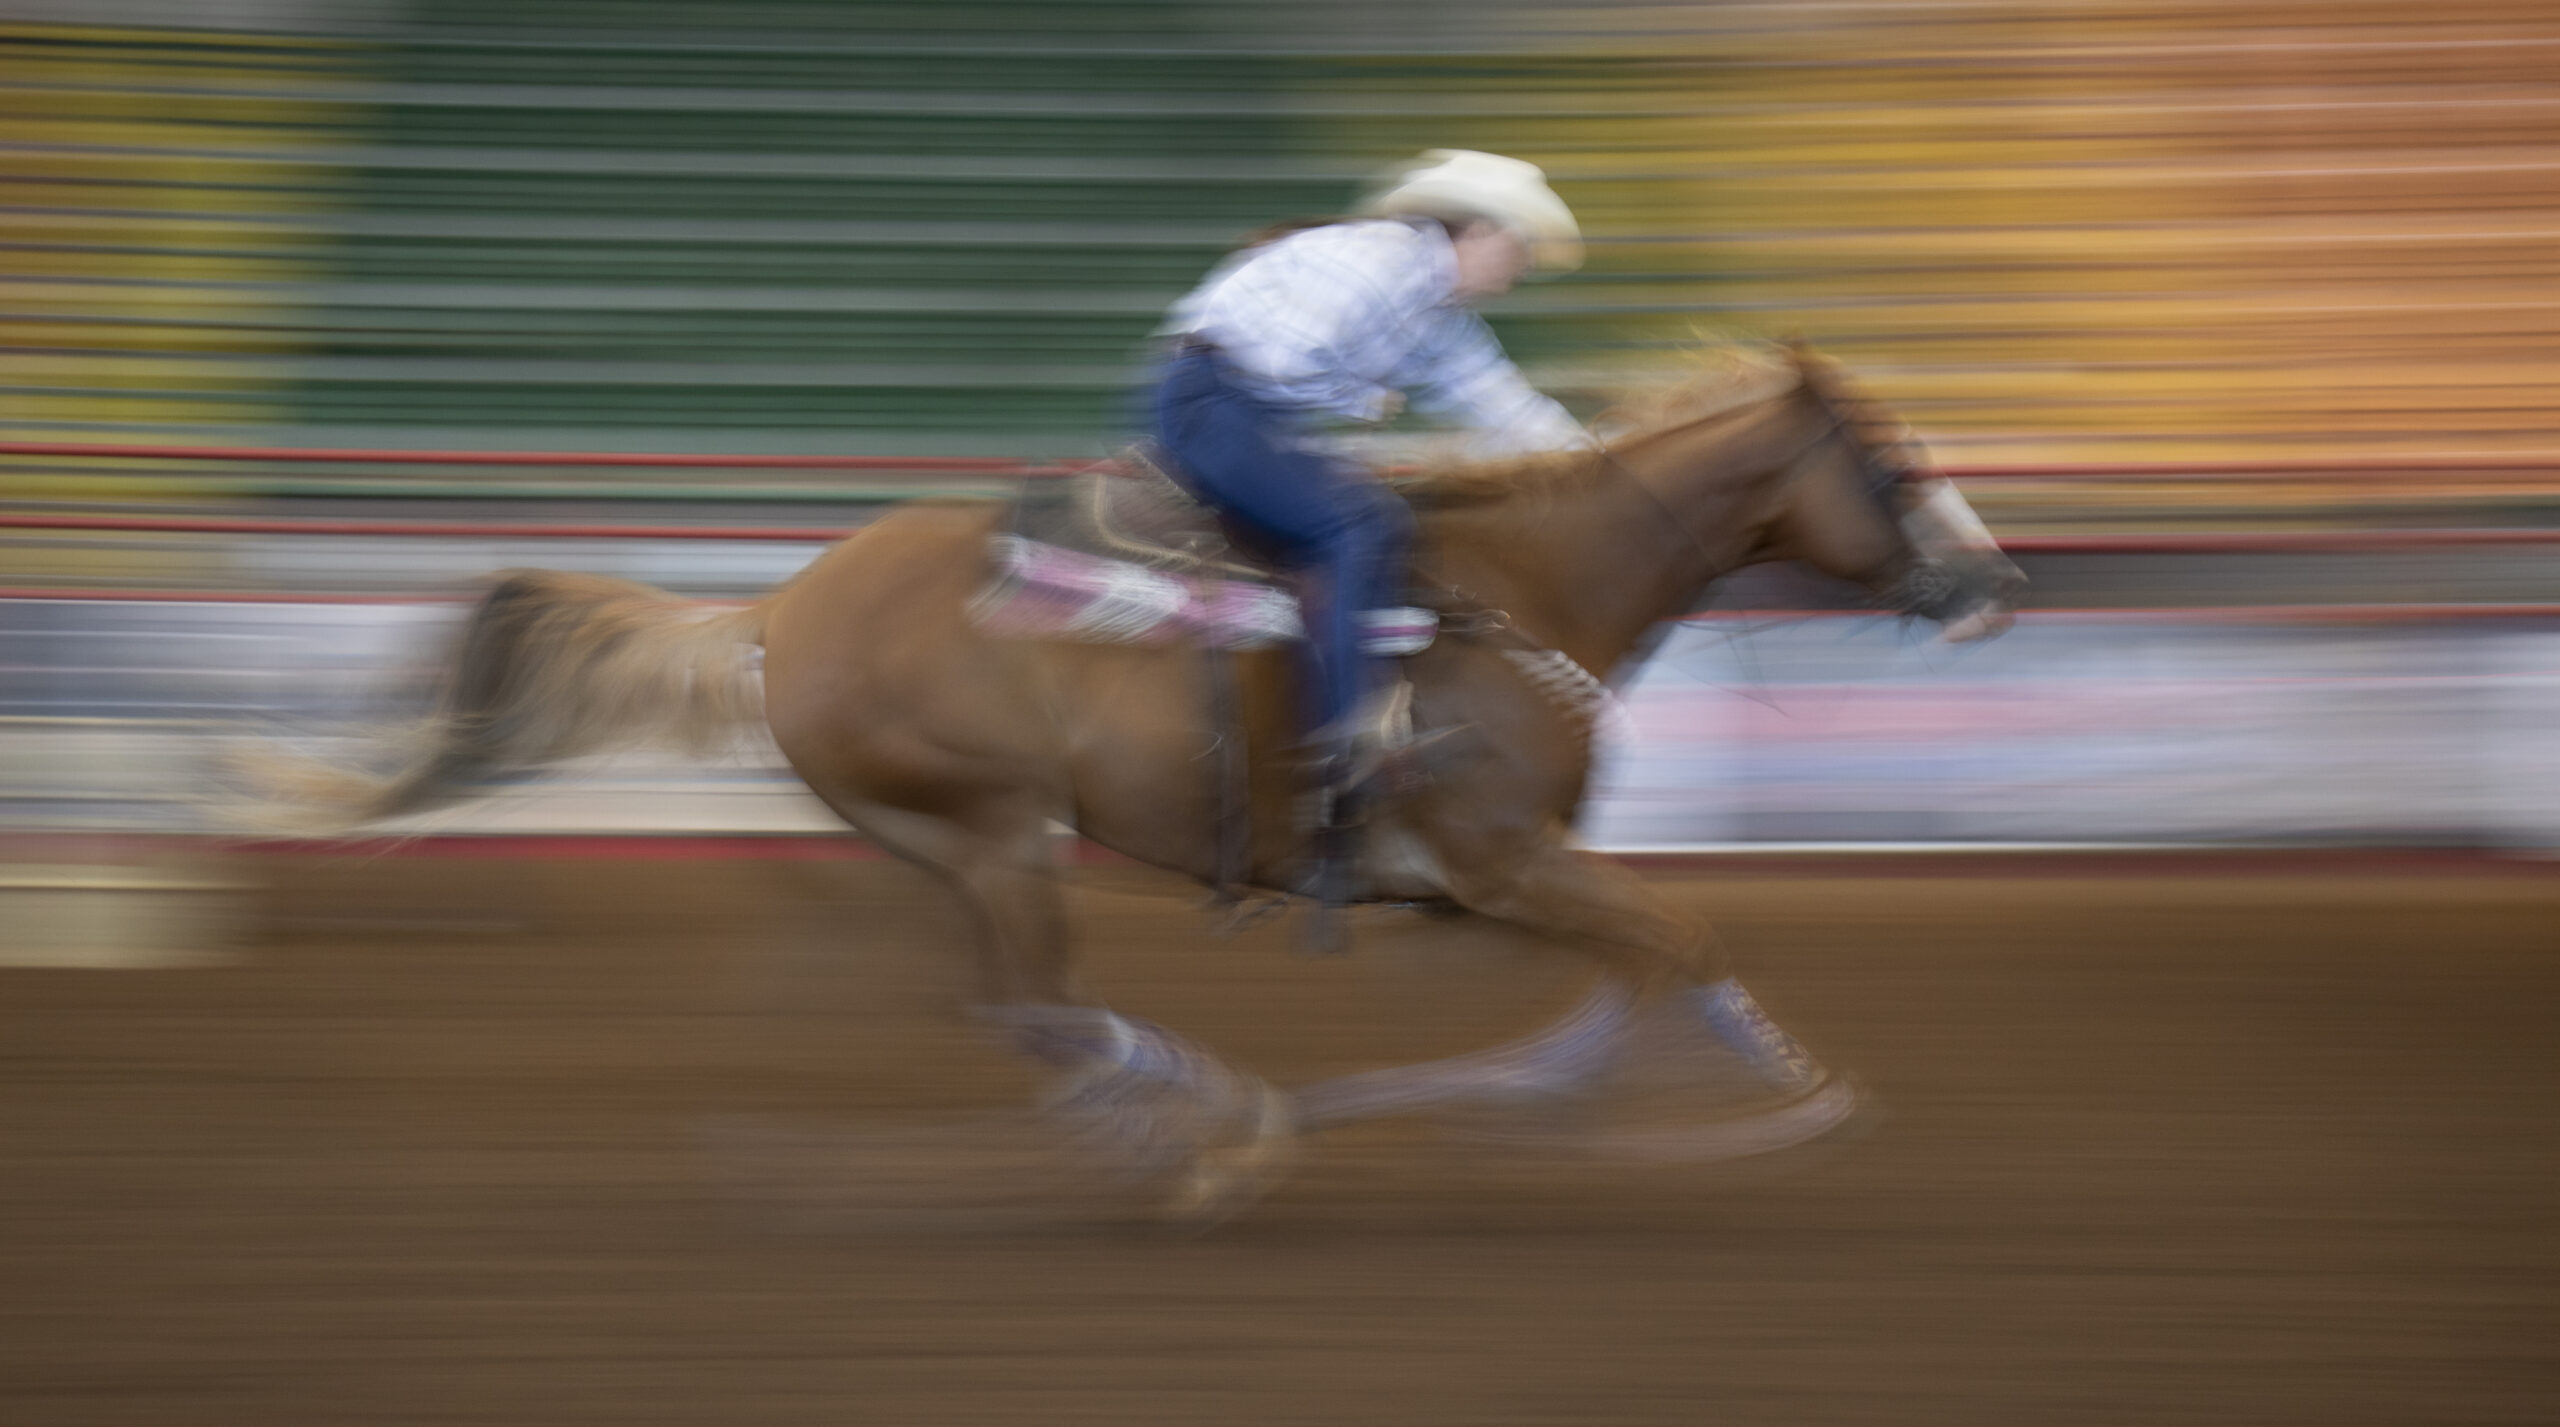 A motion-blurred image of a barrel racer finishing a race